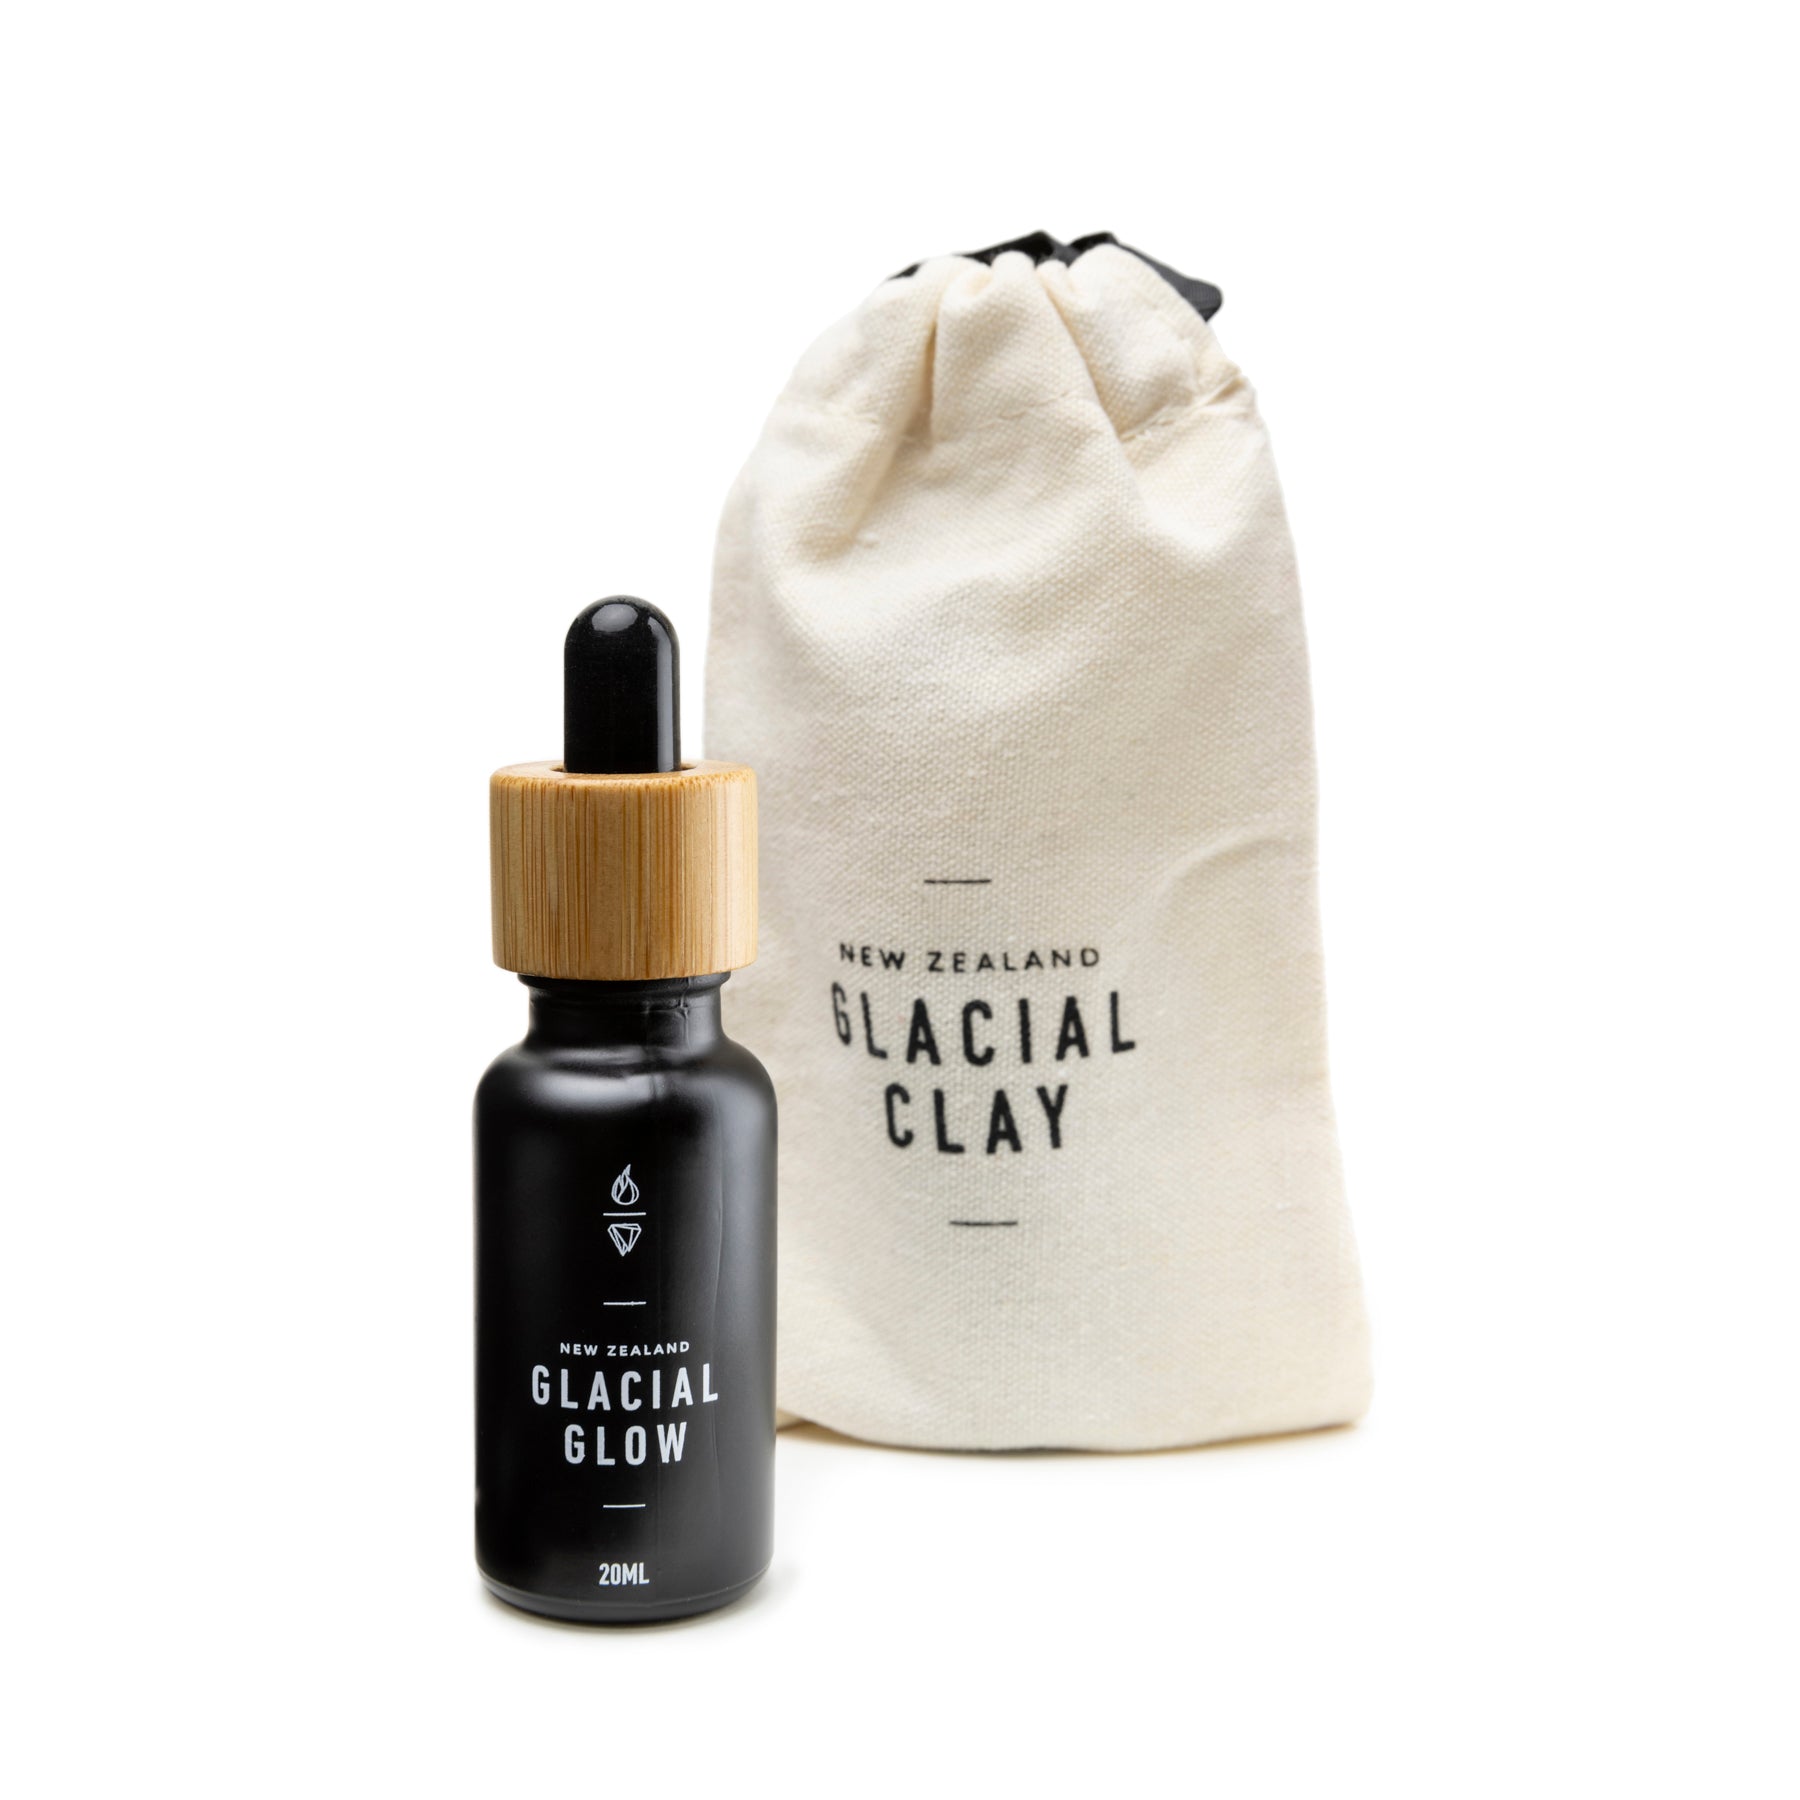 Glacial Glow Face Oil of New Zealand Glacial Clay